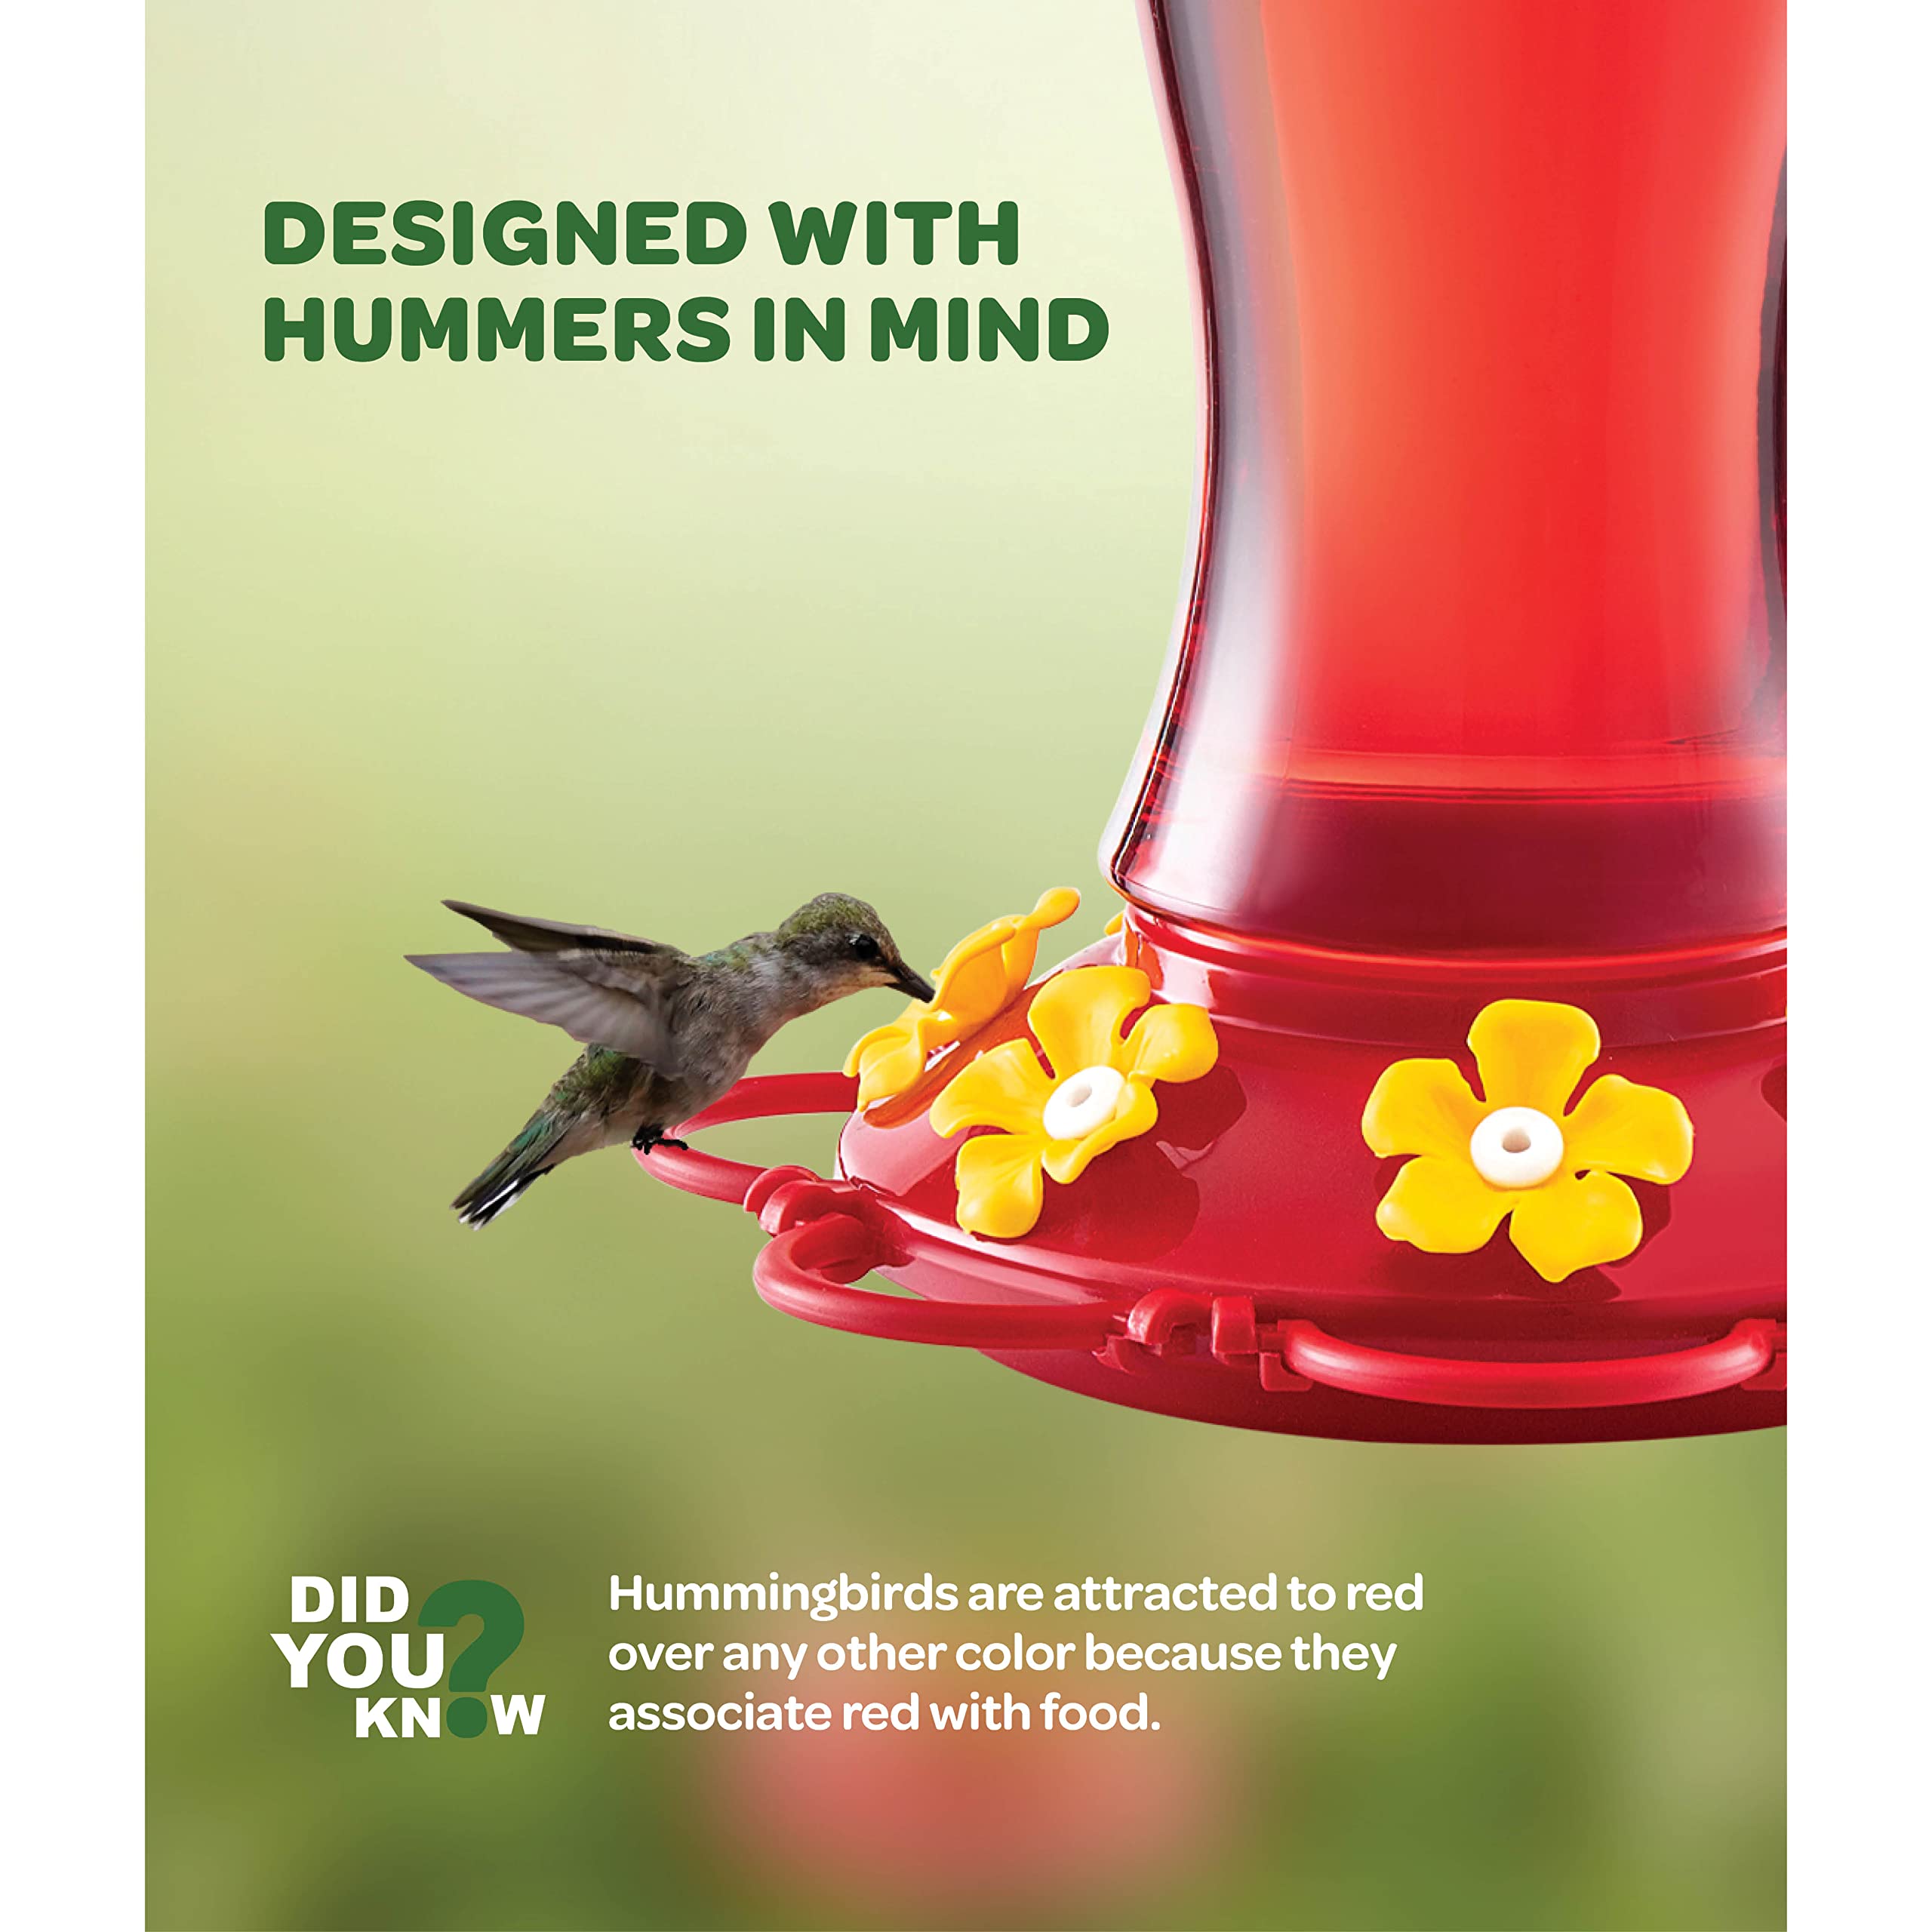 Hummingbird Feeder 30 oz. Plastic Hummingbird Feeders for Outdoors - with Built-in Ant Guard - Circular Perch with 7 Feeding Ports - Wide Mouth for Easy Filling/2 Part Base for Easy Cleaning  - Very Good